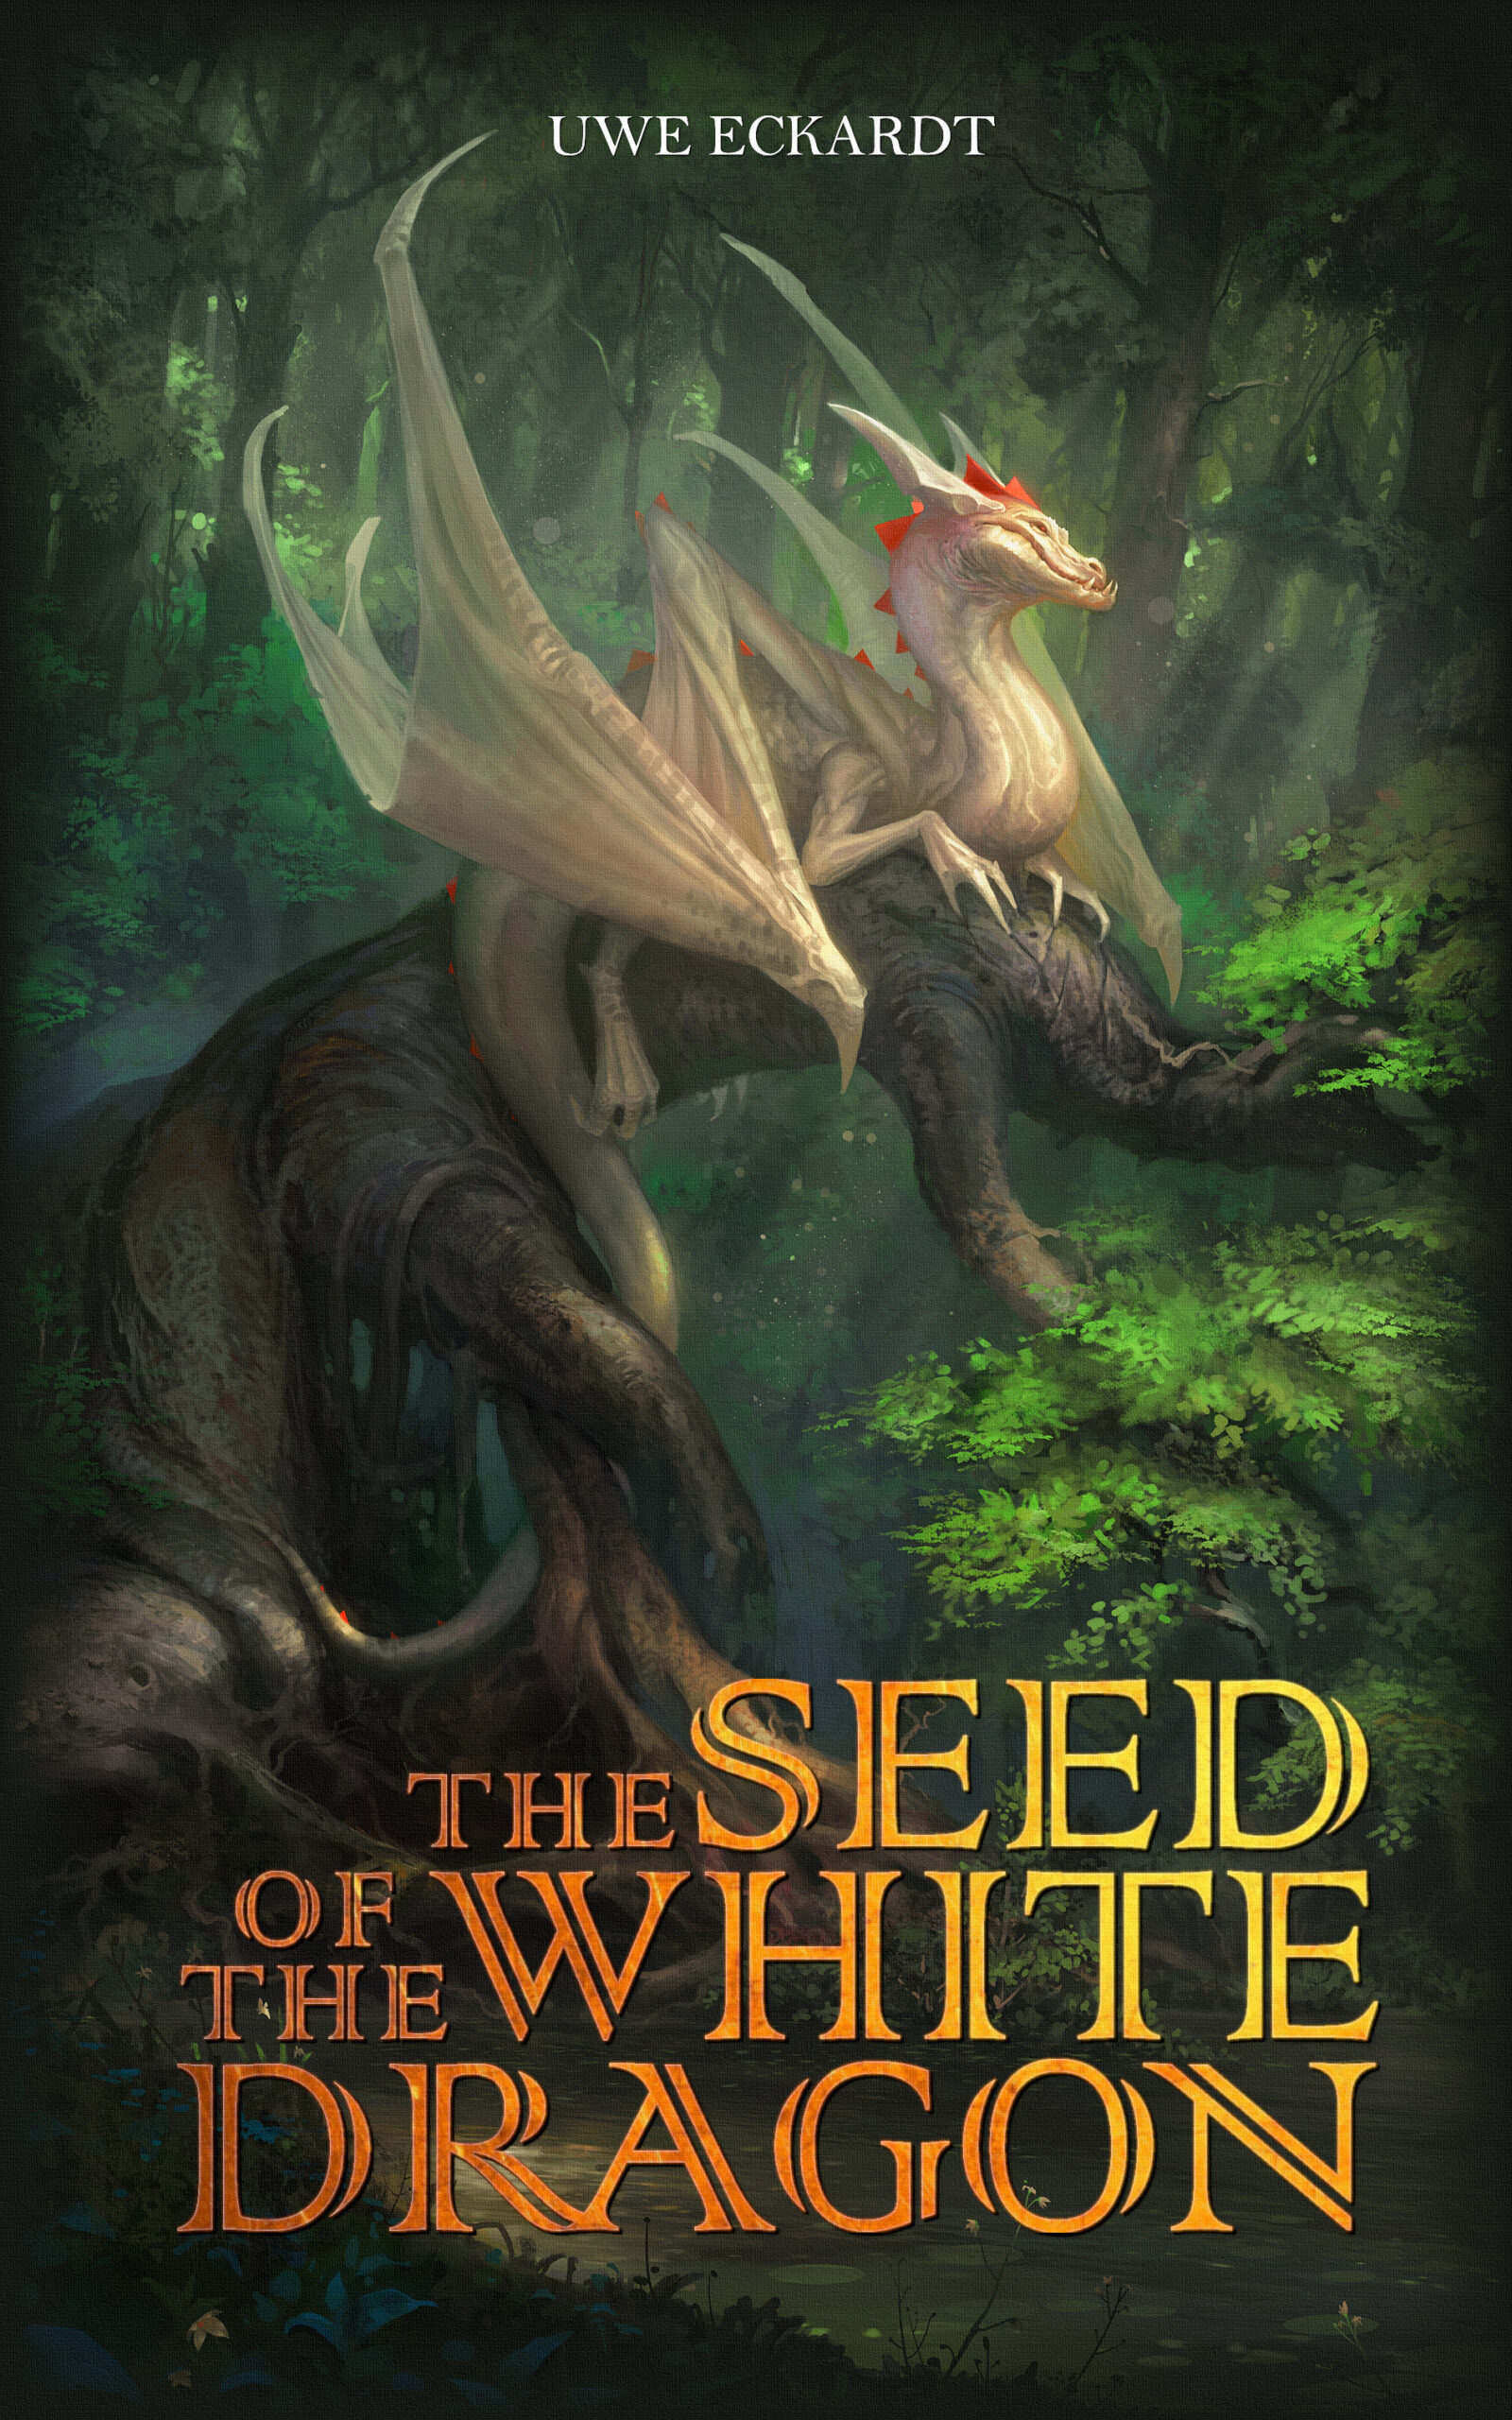 FREE: The Seed of the White Dragon by Uwe Eckardt